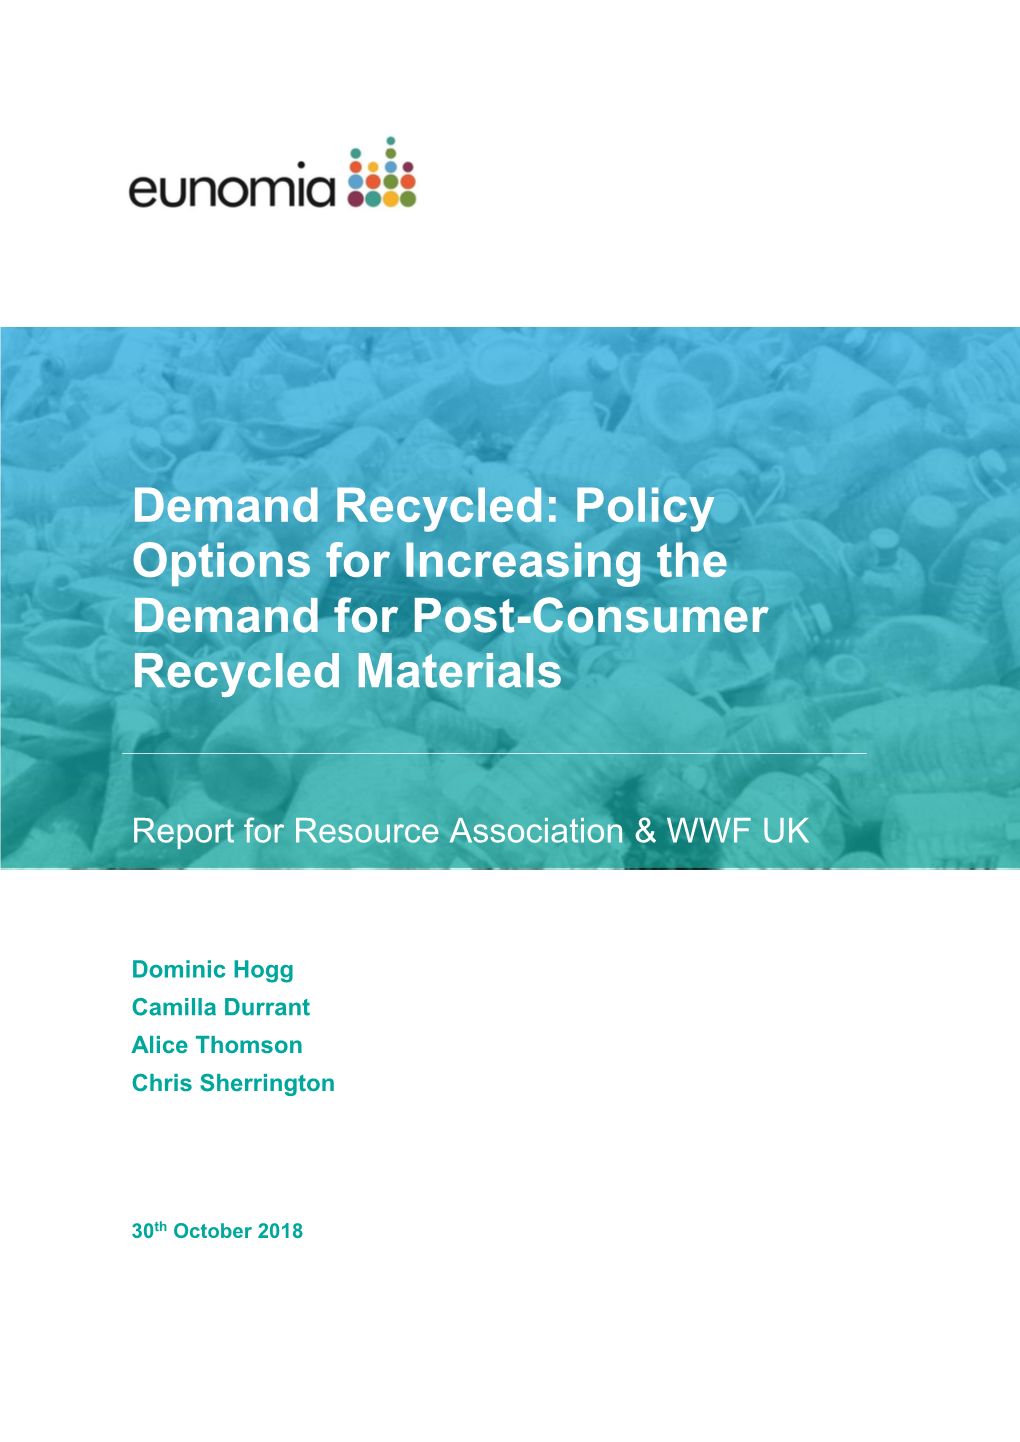 Policy Options for Increasing the Demand for Post-Consumer Recycled Materials